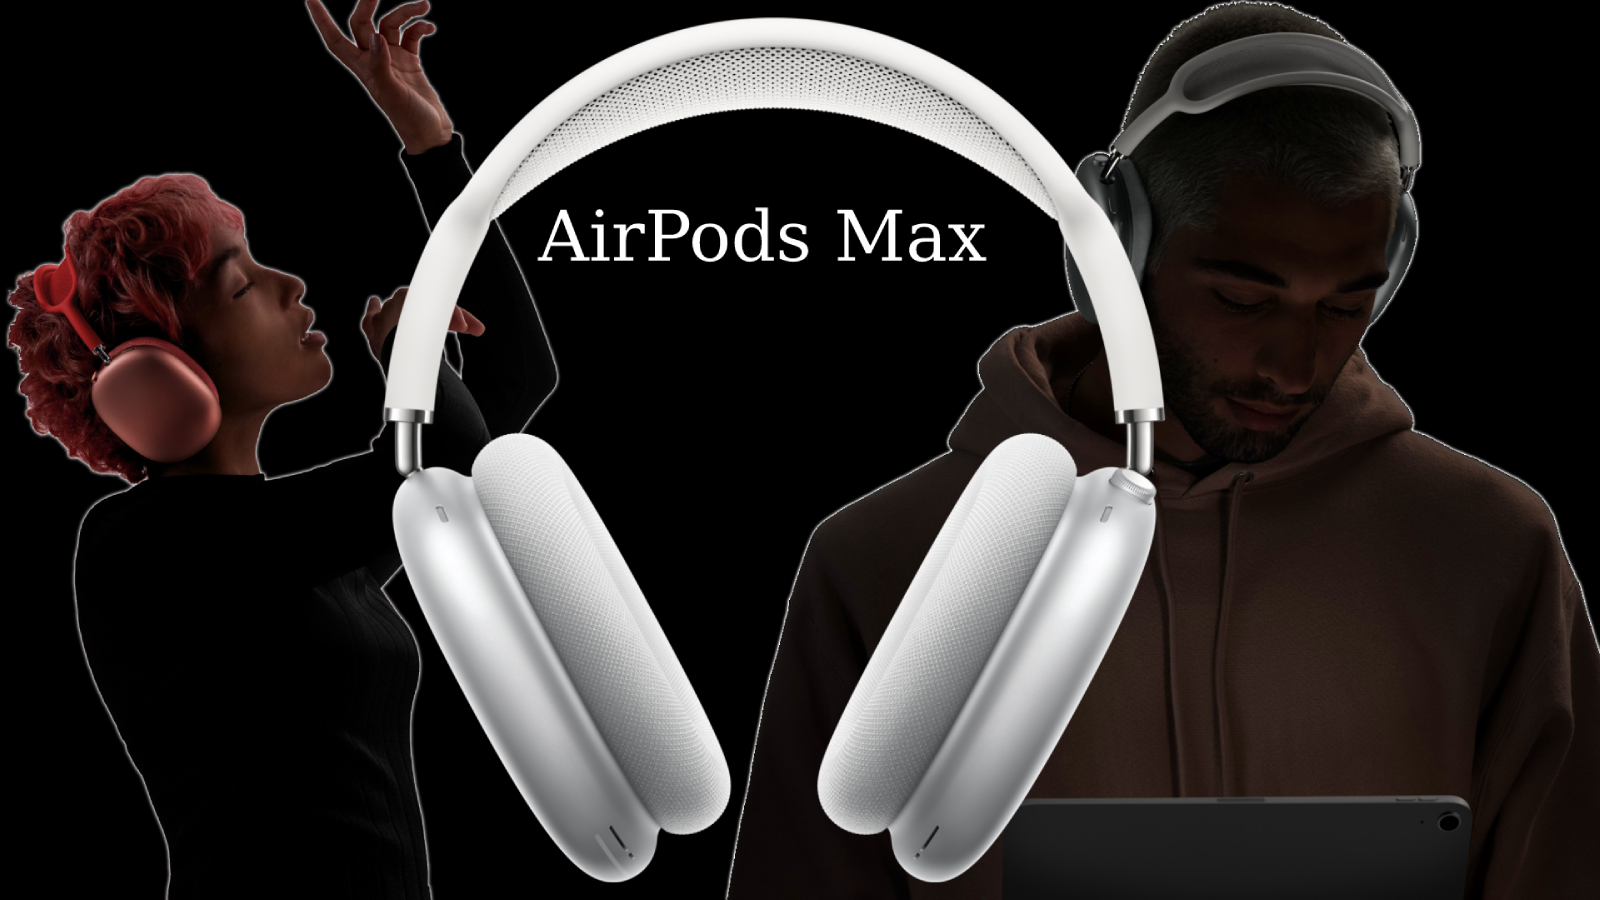 AirPods Pro 2, new AirPods Max colors expected for fall launch